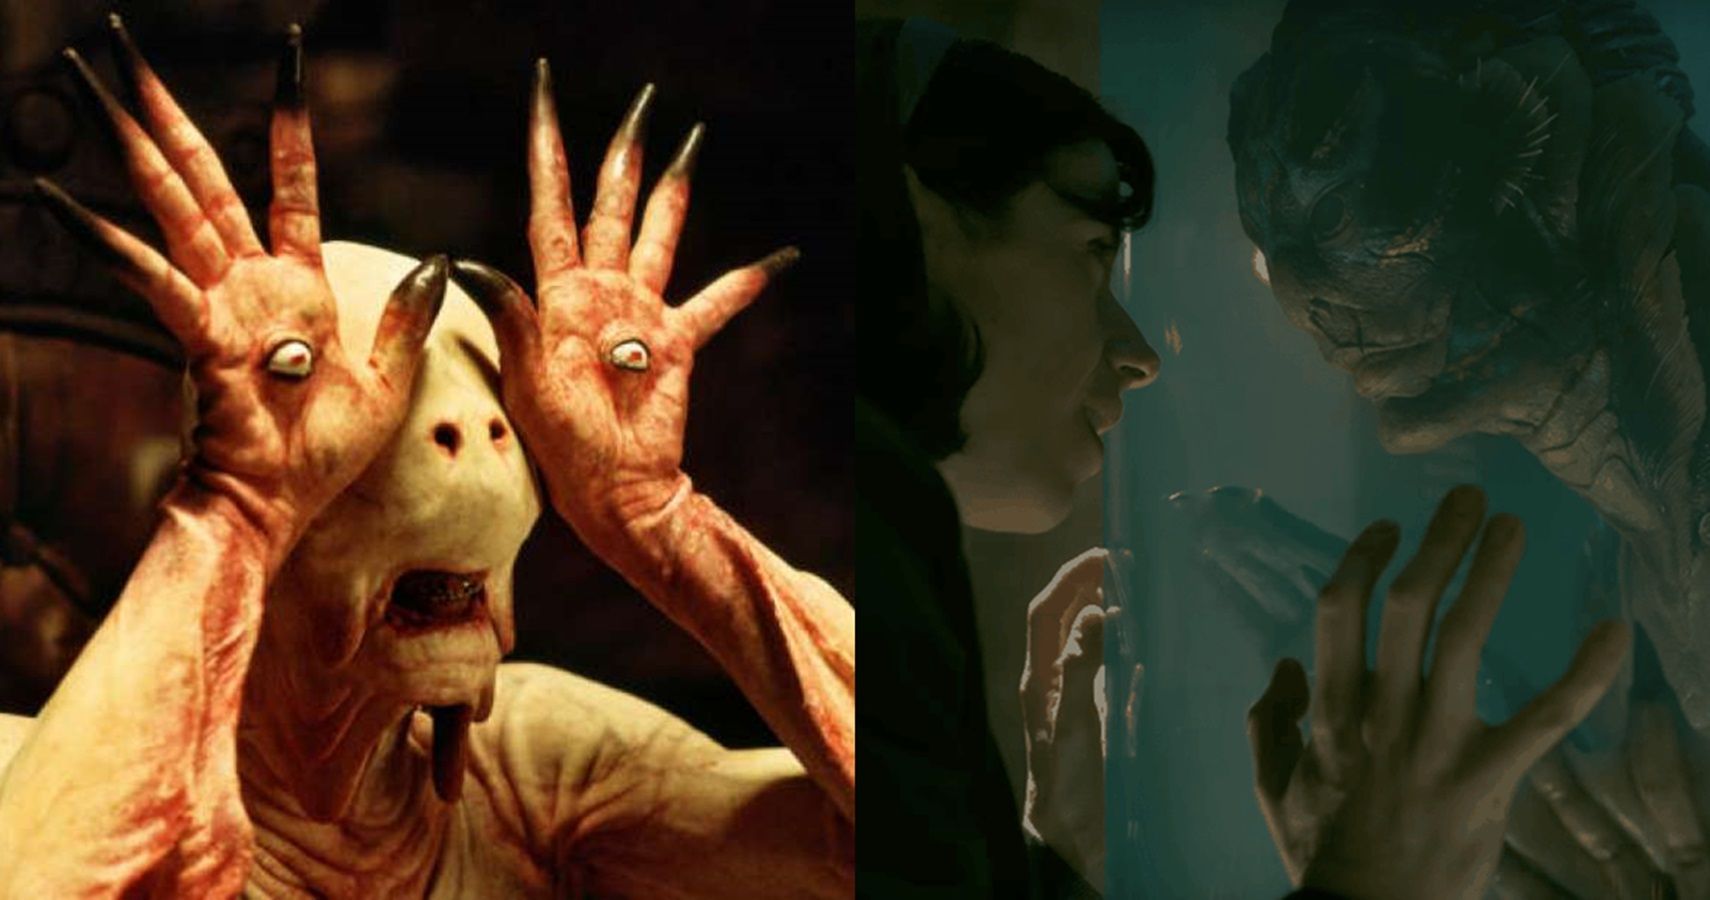 Guillermo Del Toro 5 Reasons Why Pans Labyrinth Is His Best Fantasy Movie (& 5 Why Shape Of Water Is A Close Second)